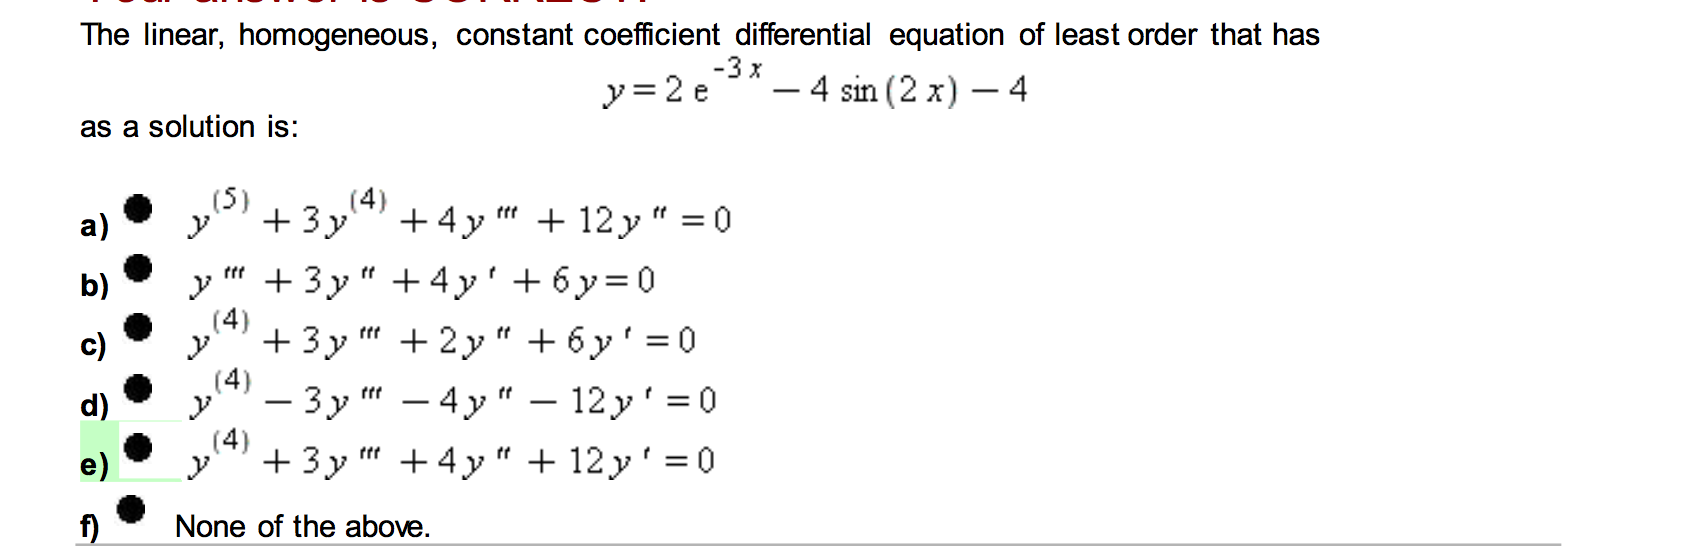 what is linear differential equation with constant coefficients